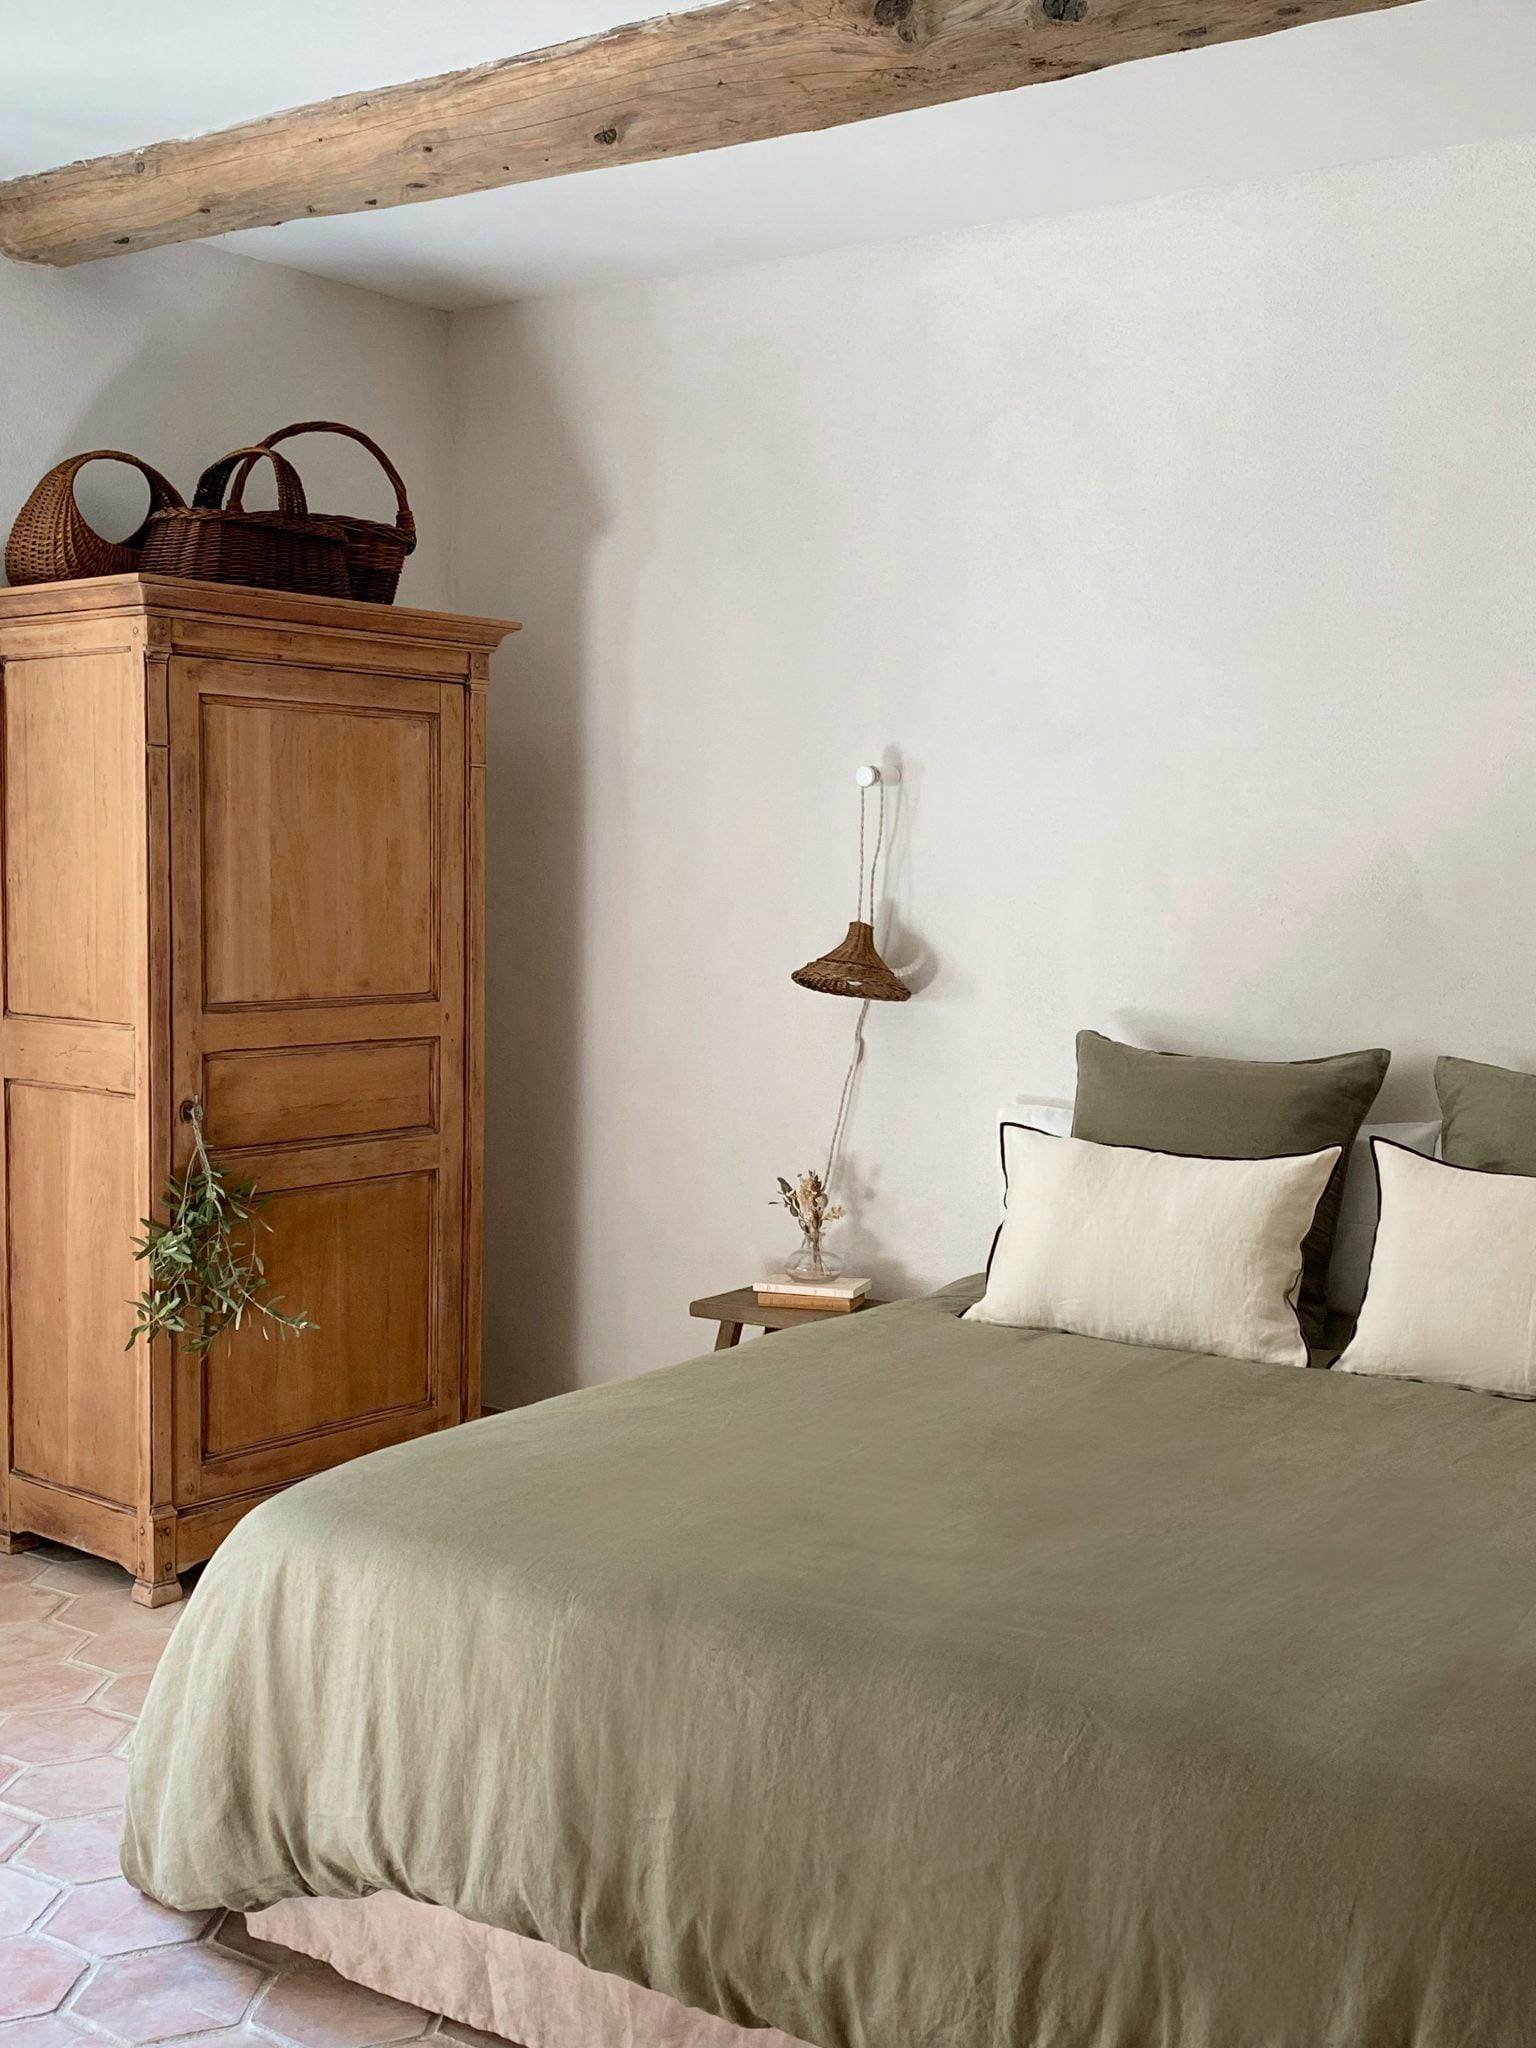 Whitewashed walls, double bed with green linen sheets, Provencal wardrobe